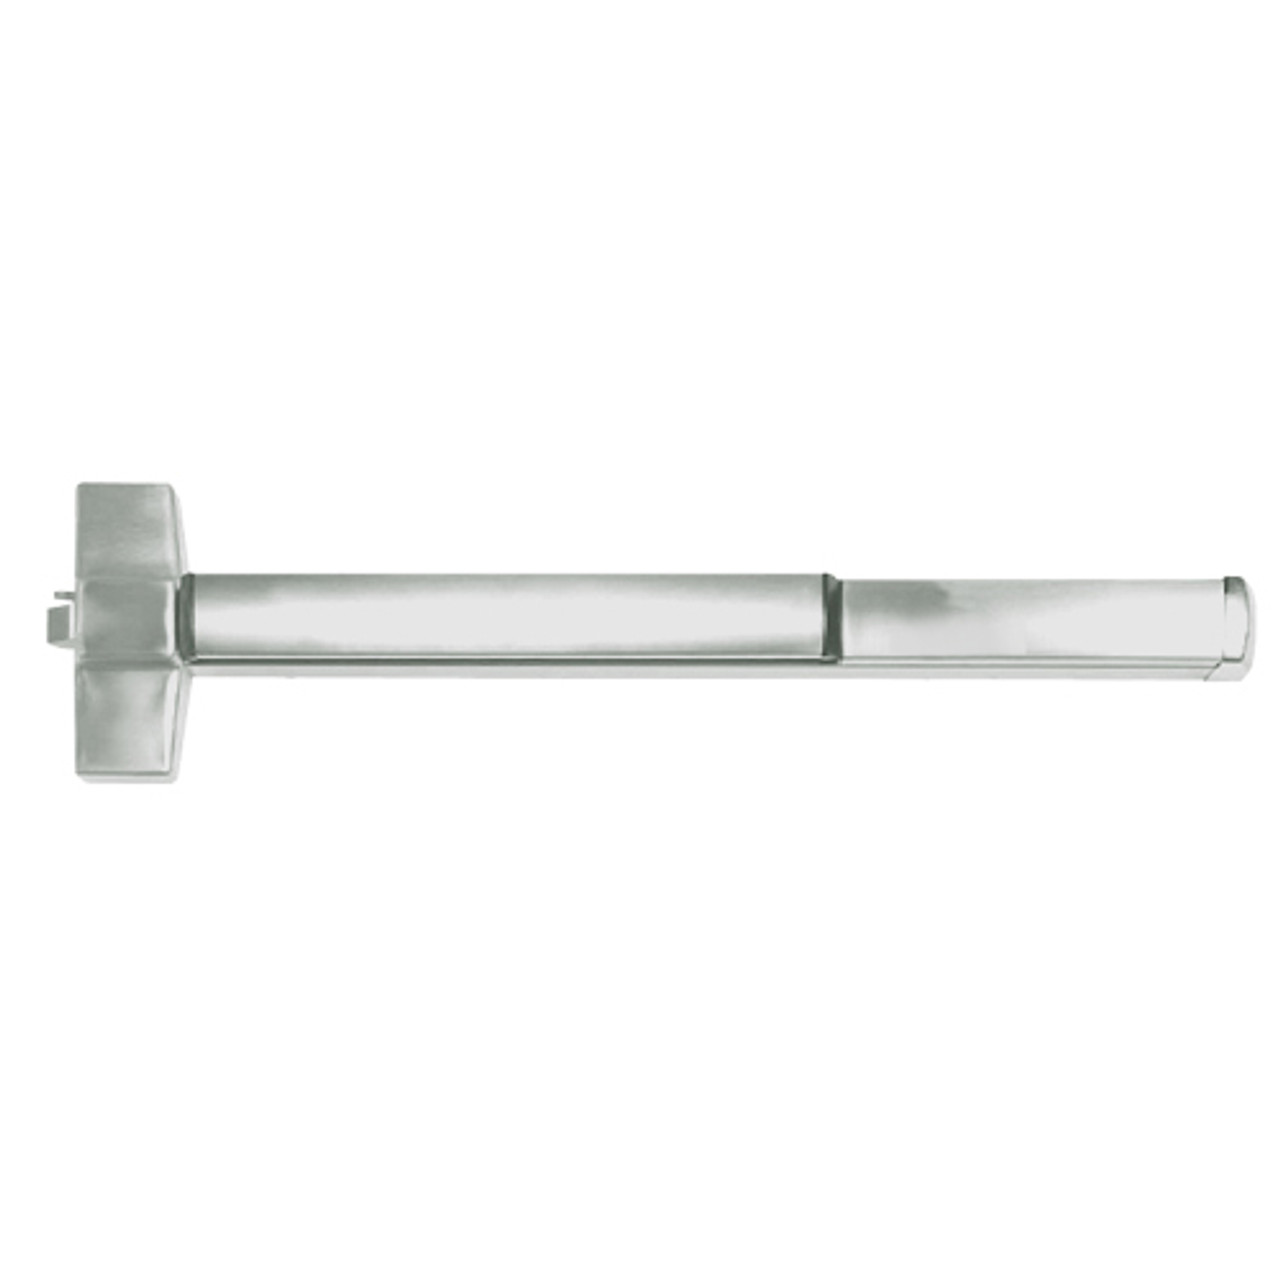 ED5200A-619-M61 Corbin ED5200 Series Fire Rated Rim Exit Device with Exit Alarm Device in Satin Nickel Finish